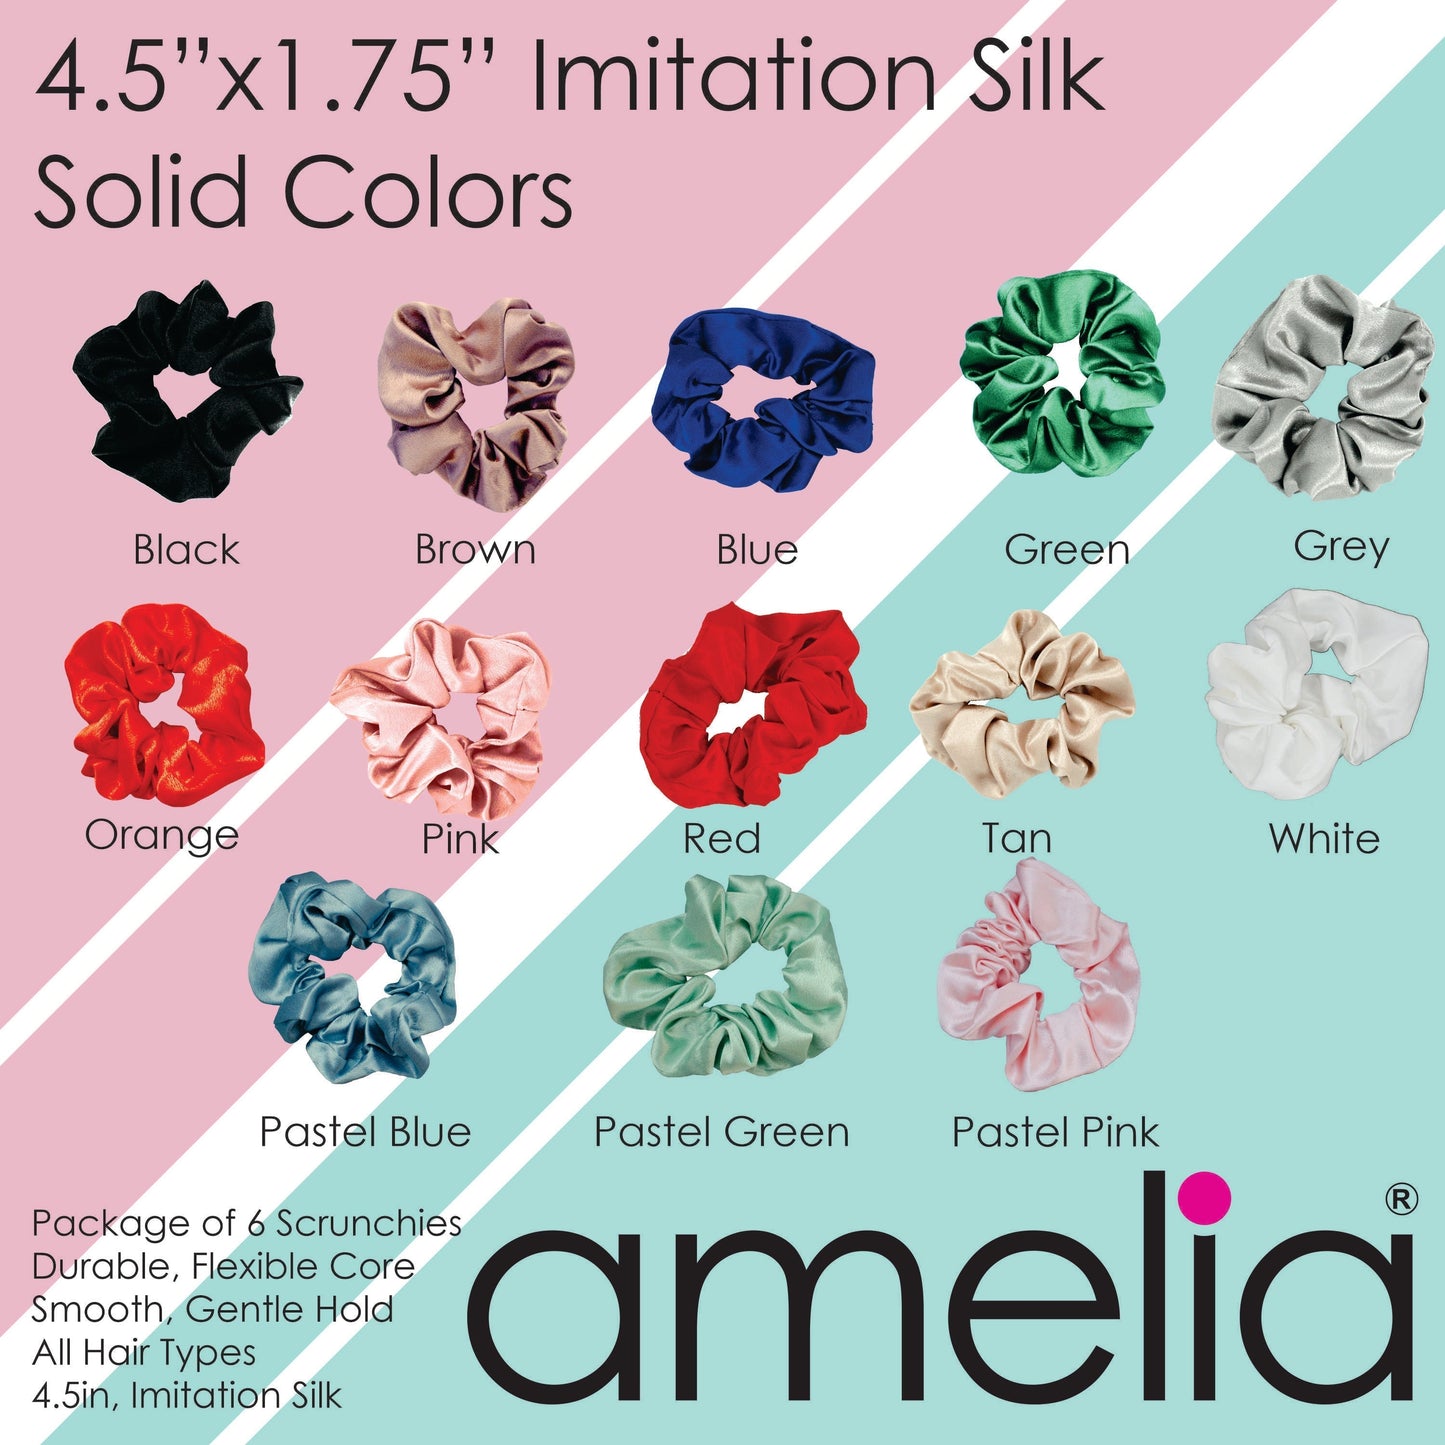 Amelia Beauty, Forest Mix Imitation Silk Scrunchies, 4.5in Diameter, Gentle on Hair, Strong Hold, No Snag, No Dents or Creases. 6 Pack